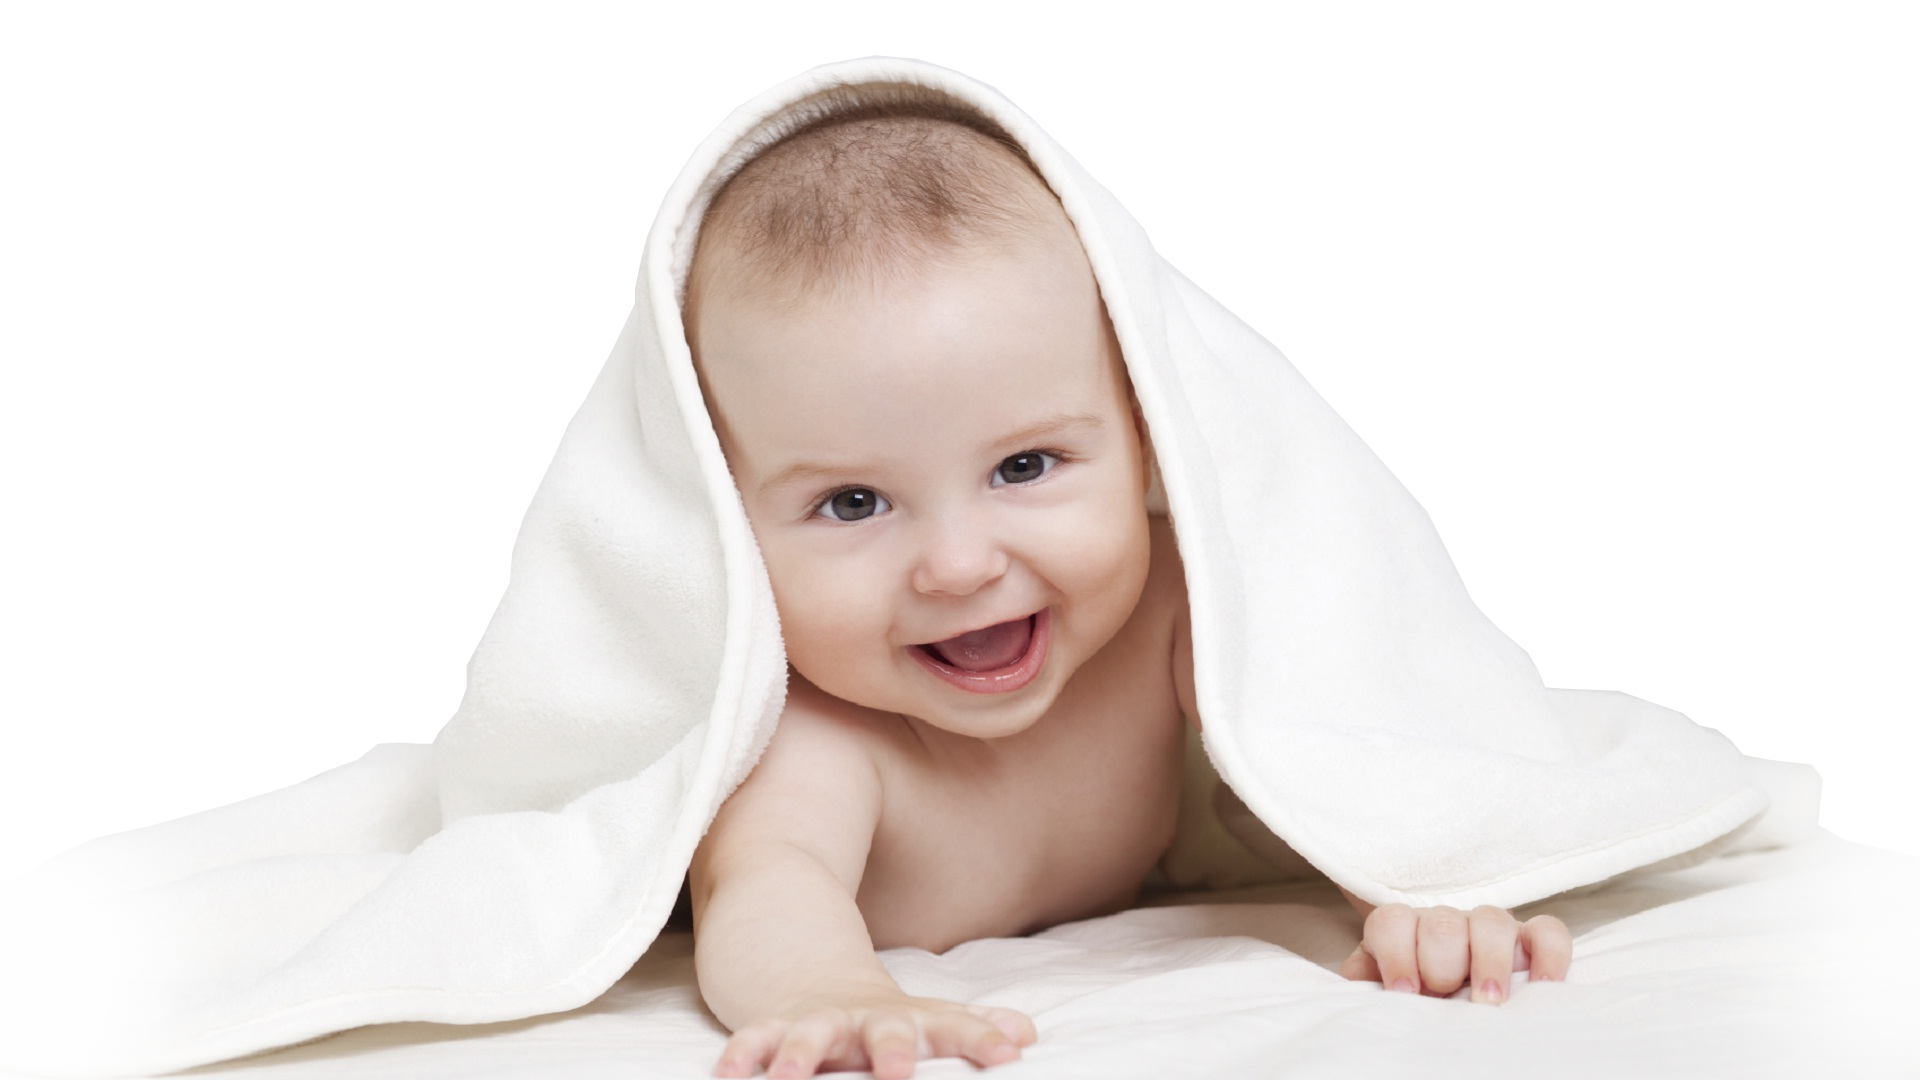 Baby Image - Kids Face PNG HD